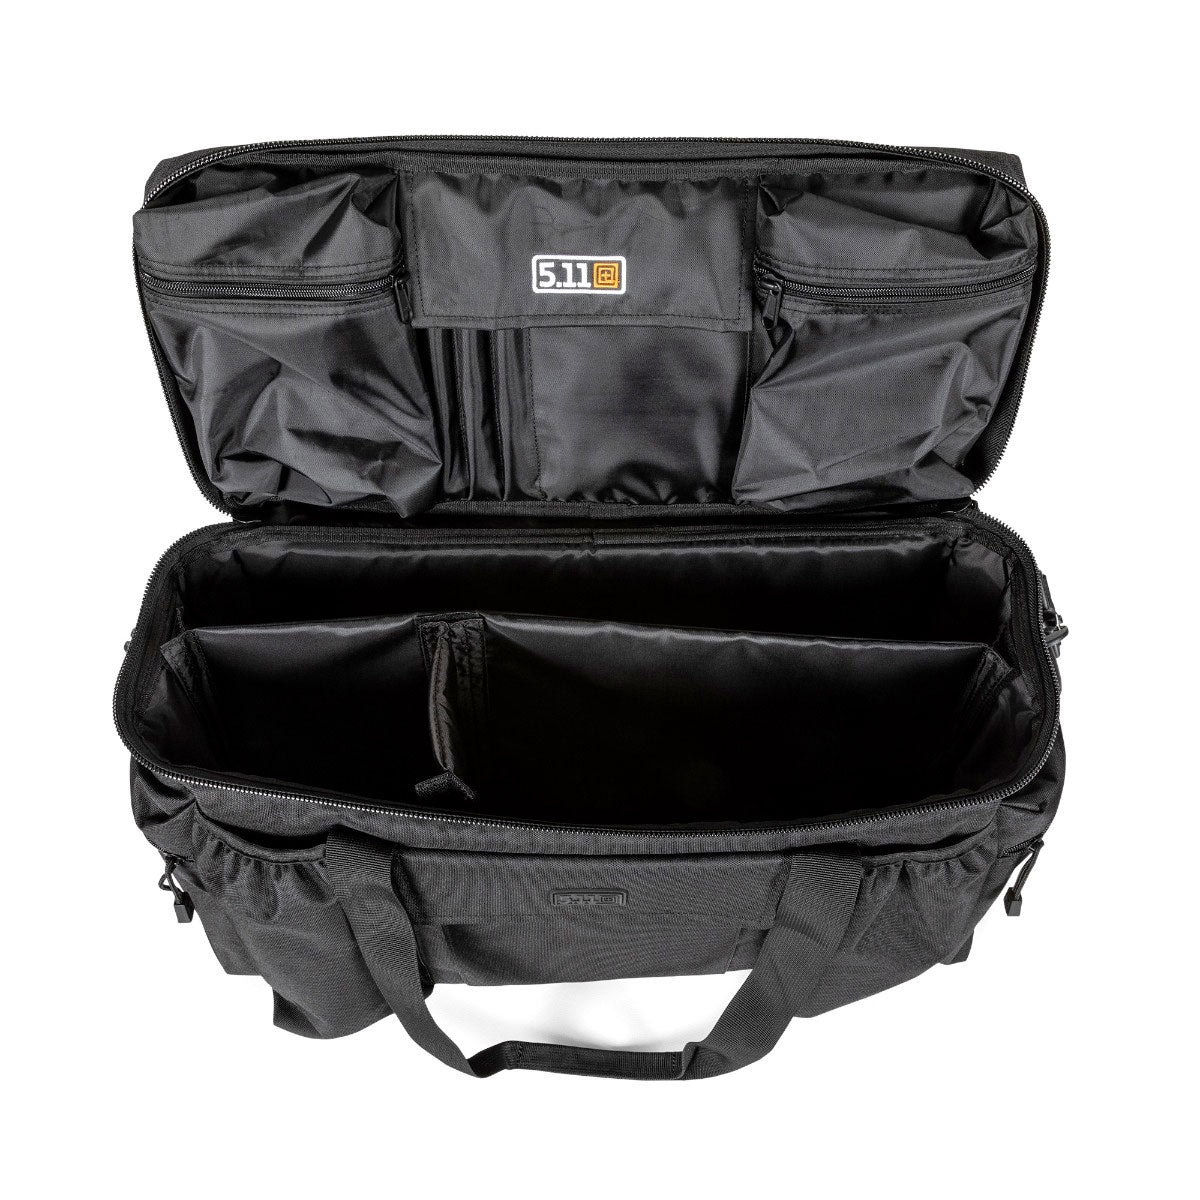 5.11 Tactical Patrol Ready Police Duty Gear Bag Bags, Packs and Cases 5.11 Tactical Tactical Gear Supplier Tactical Distributors Australia